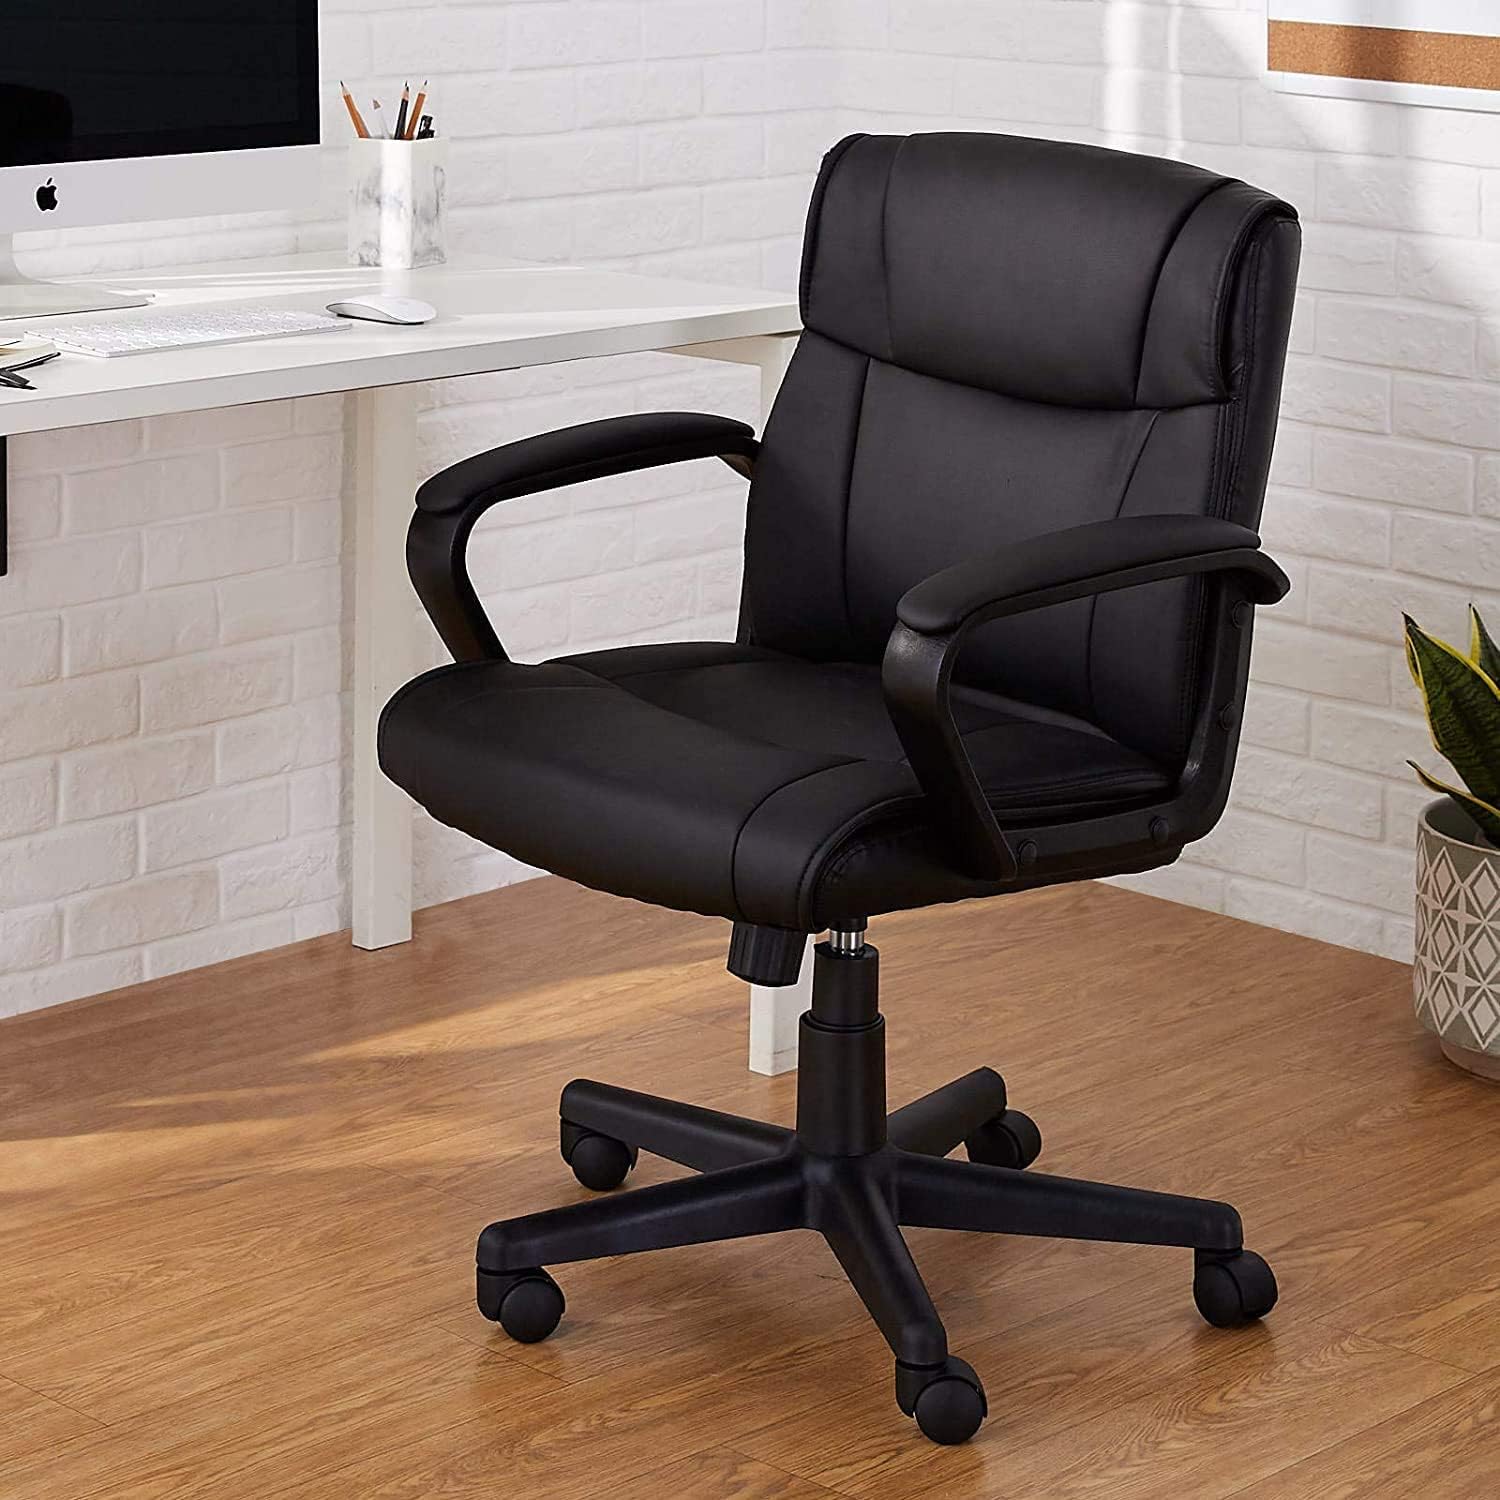 Amazon Basics Padded Office Desk Chair with Armrests, [...]